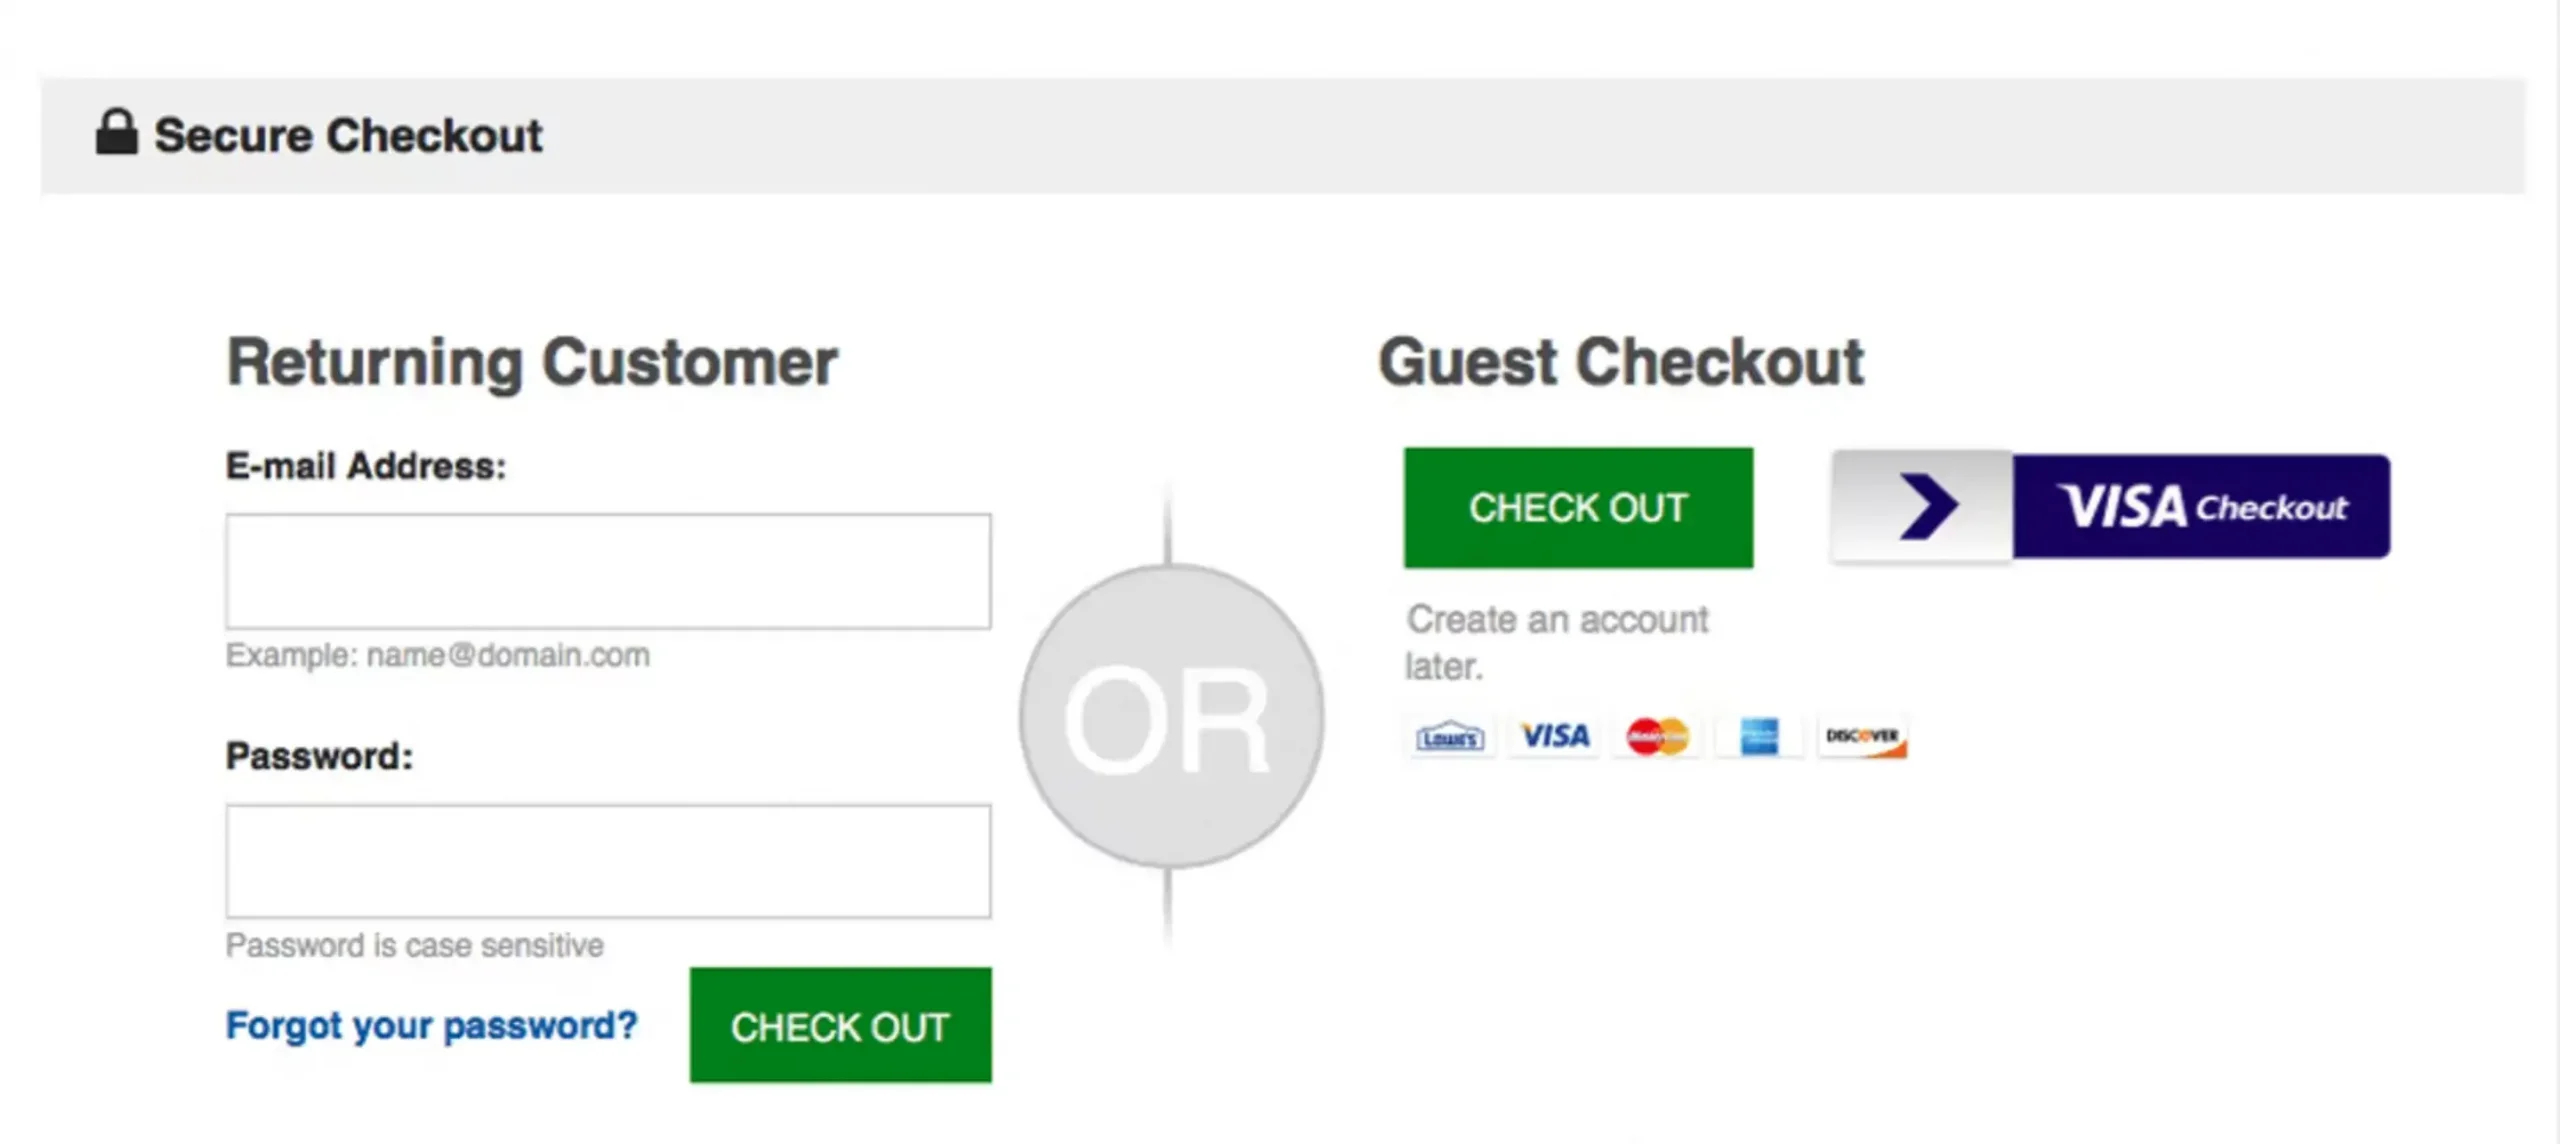 Offer Guest Checkout for eCommerce conversion rate optimization